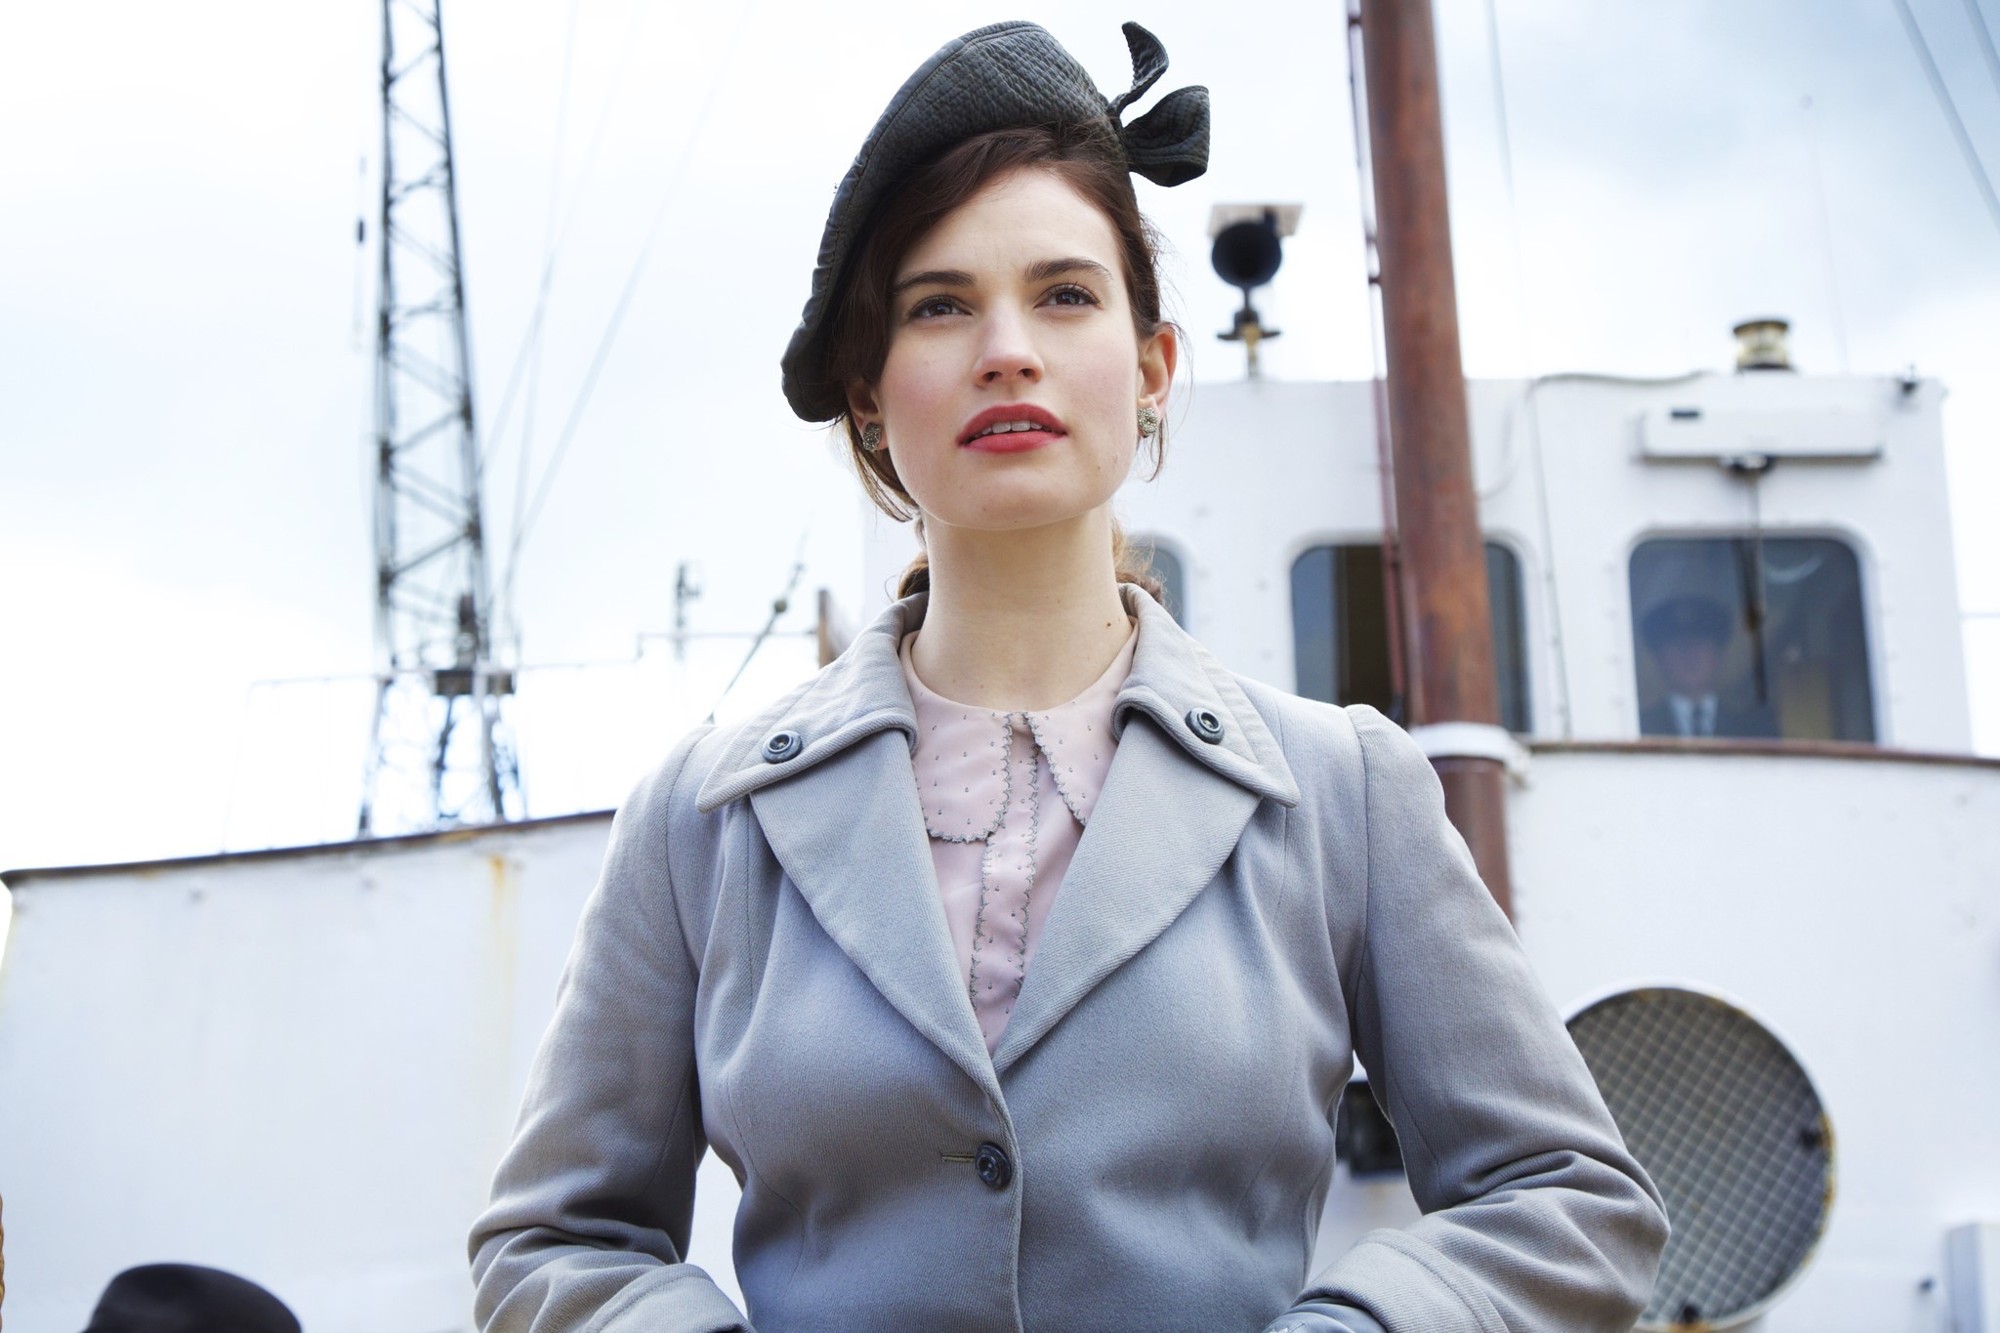 Lily James stars as Juliet Ashton in Netflix's The Guernsey Literary and Potato Peel Pie Society (2018)